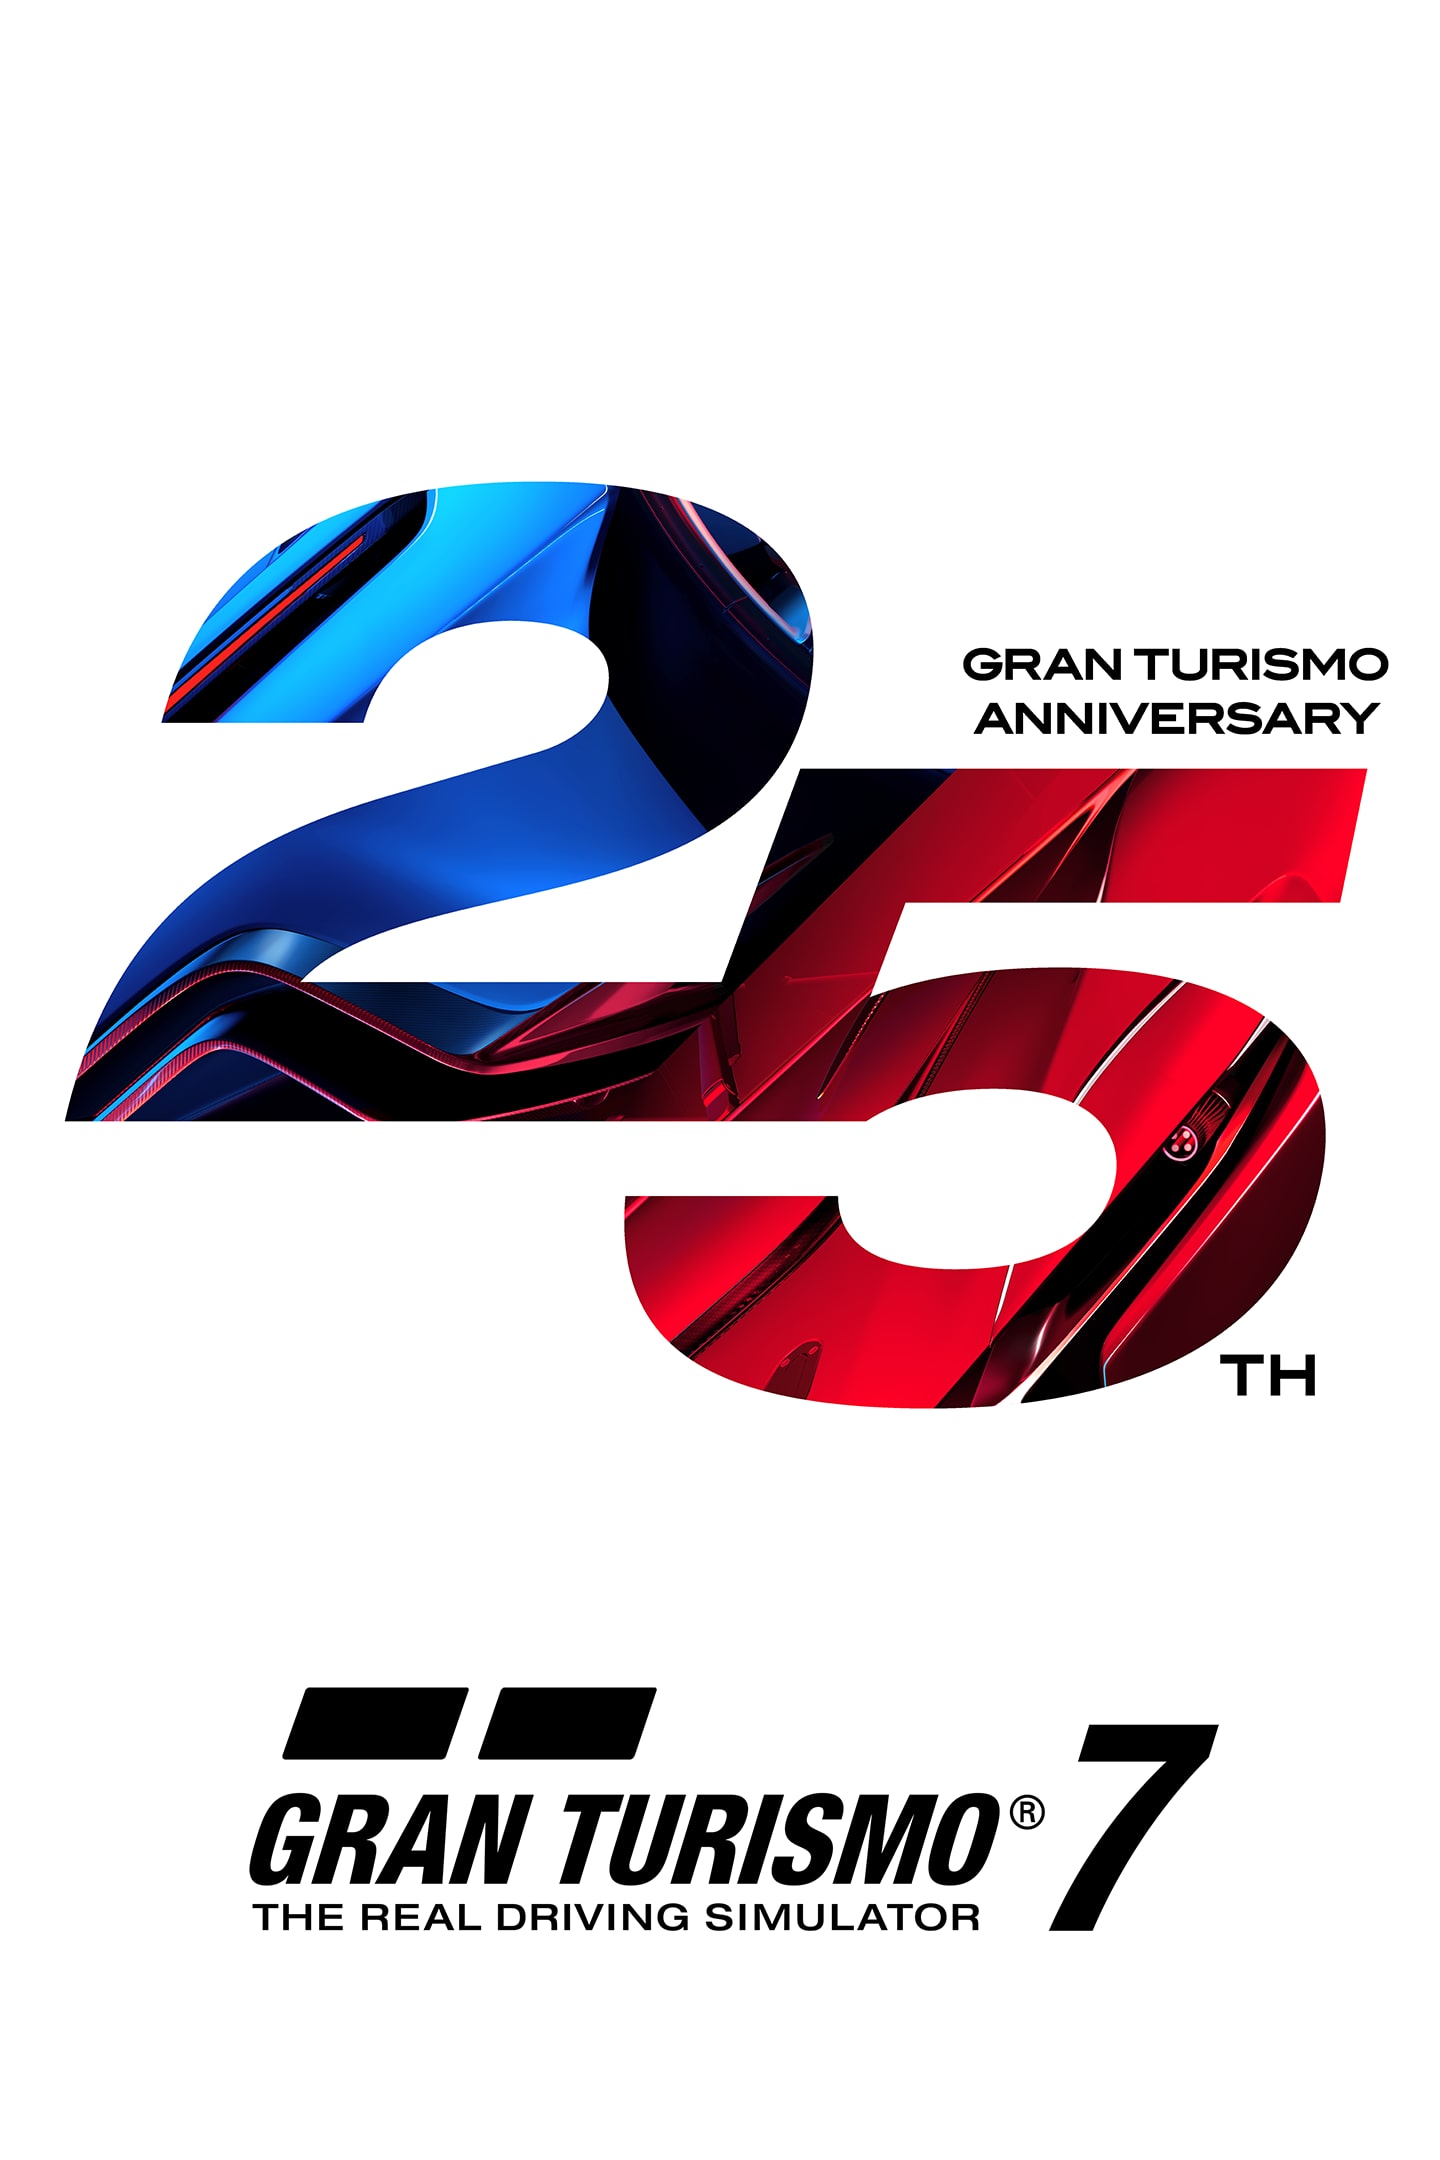 Gran Turismo 7's online racing and campaign supports PlayStation